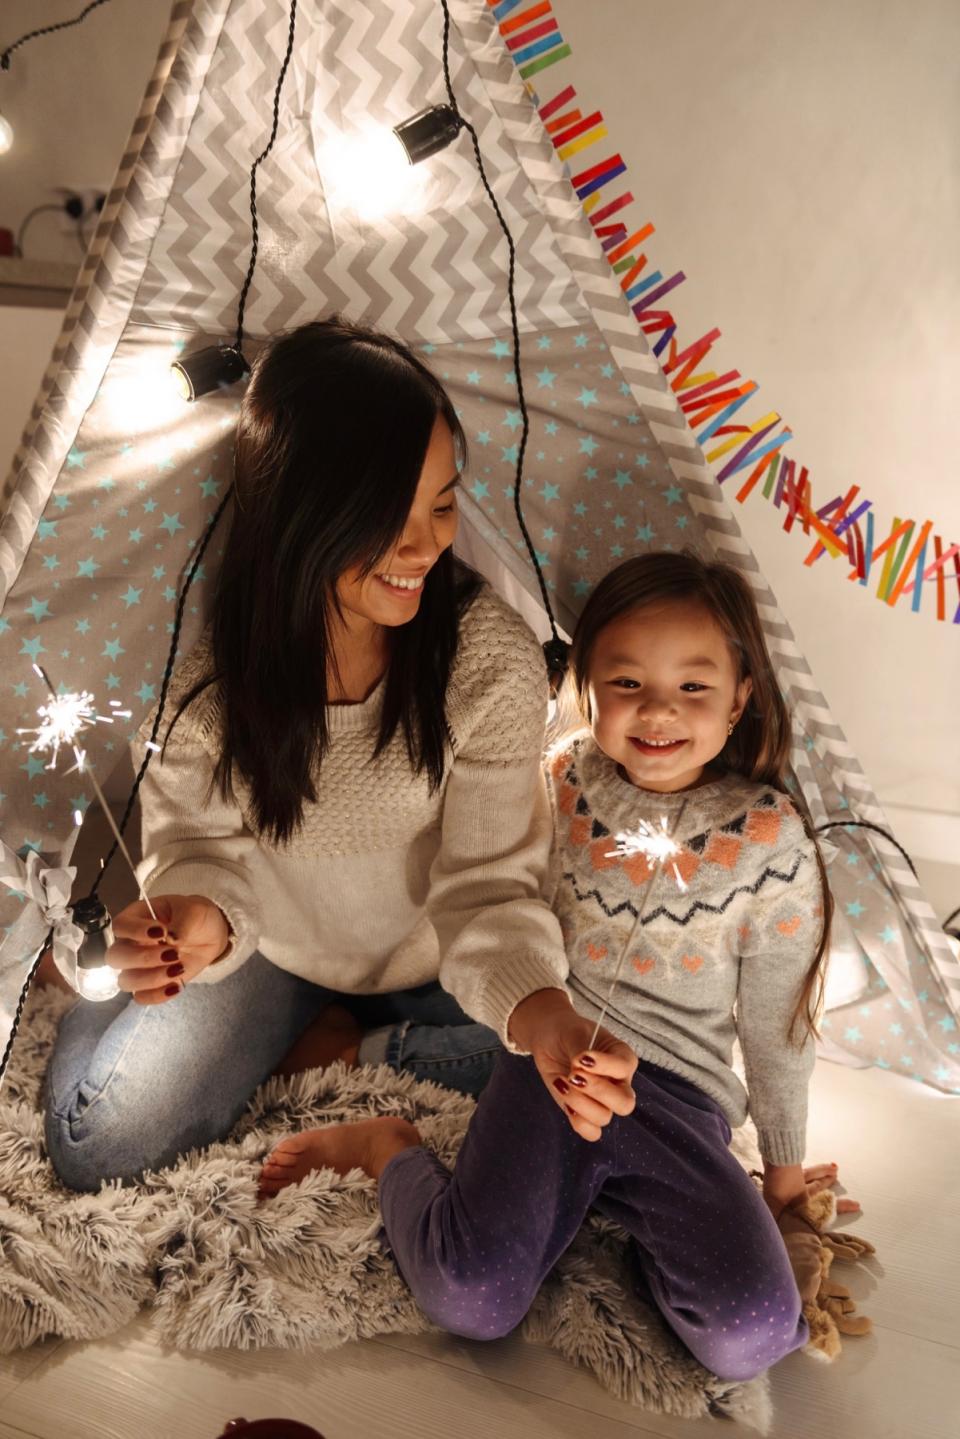 Mother and daughter celebrate a holiday together and play with sparklers.